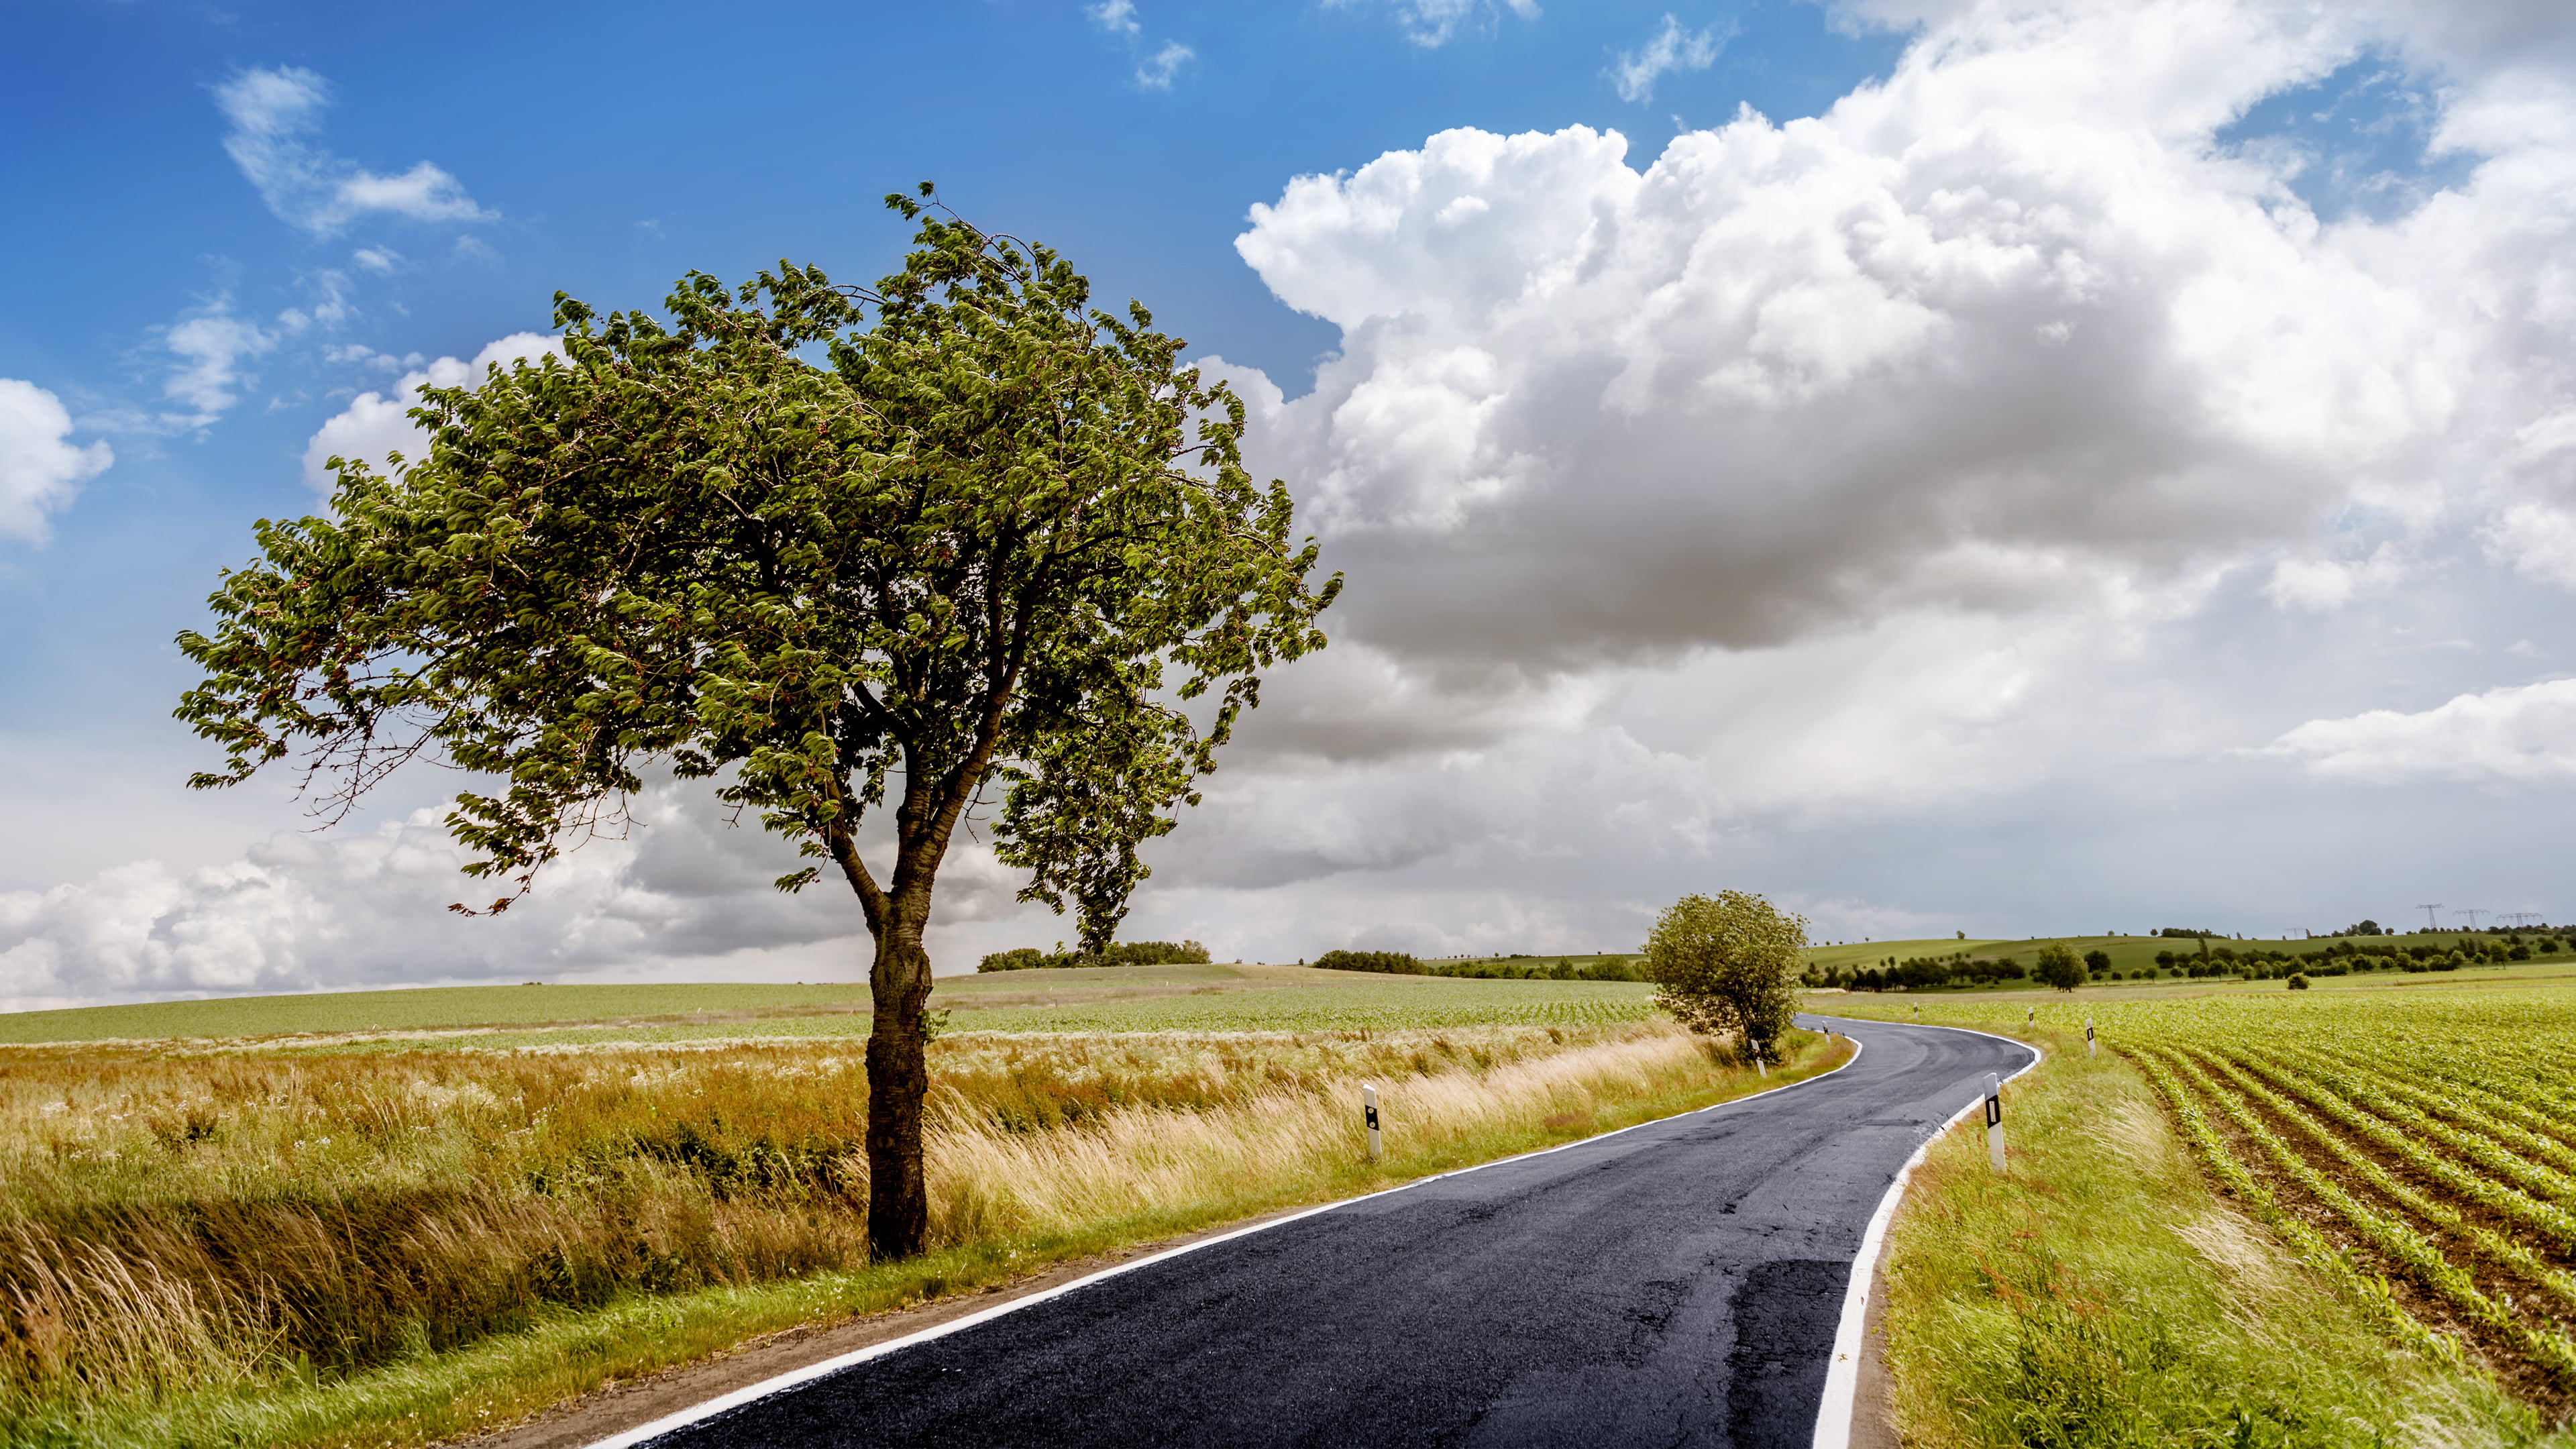 paved road between green grass field, trees, road, landscape, clouds